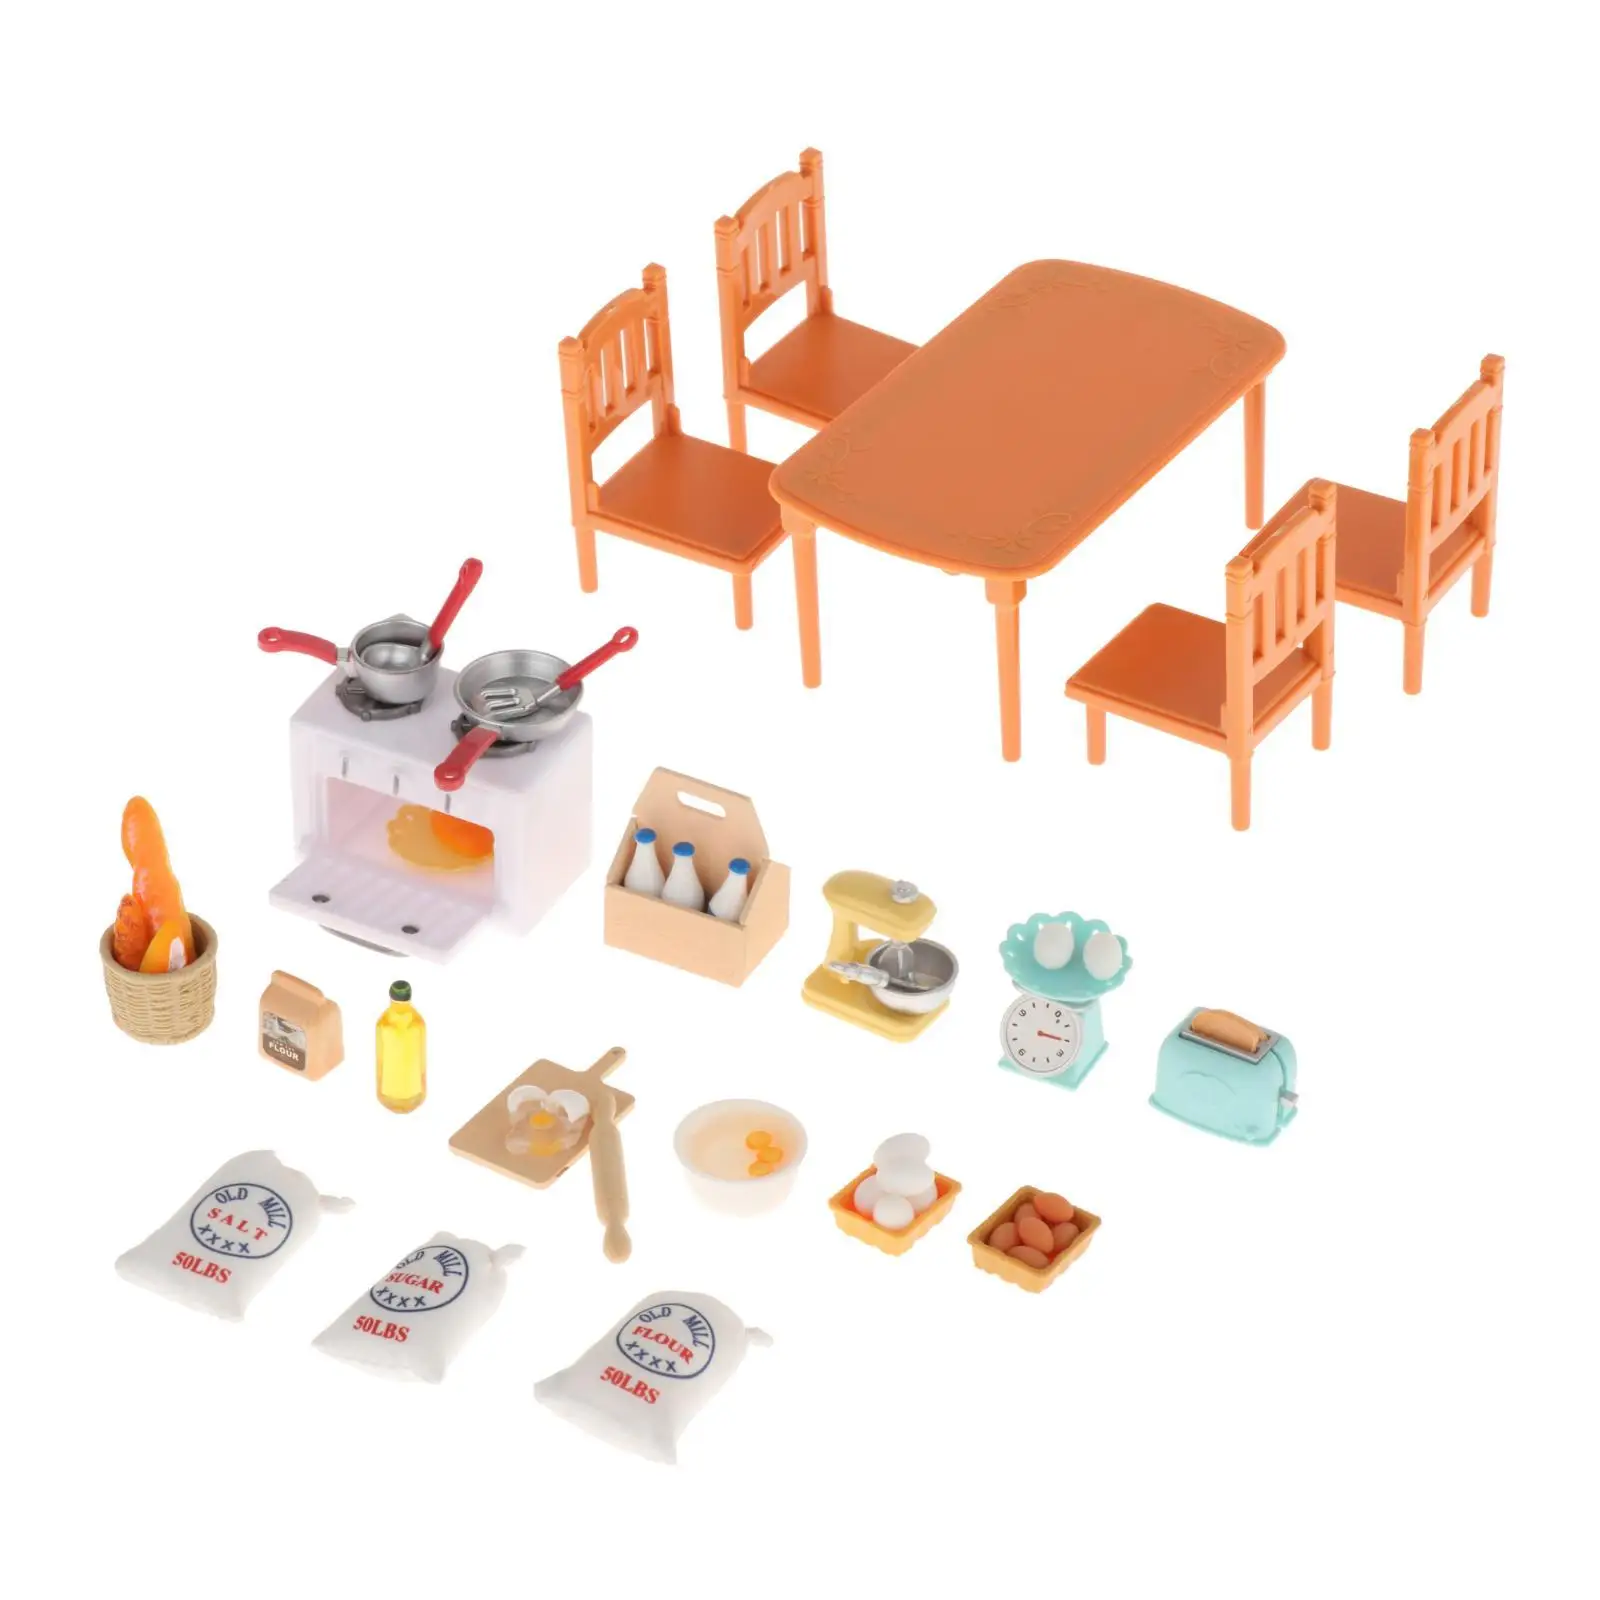 Toddlers Pretend Cooking Playset Doll House Furniture Role Playing Utensils Cookware Toys for Coffee Age 3+